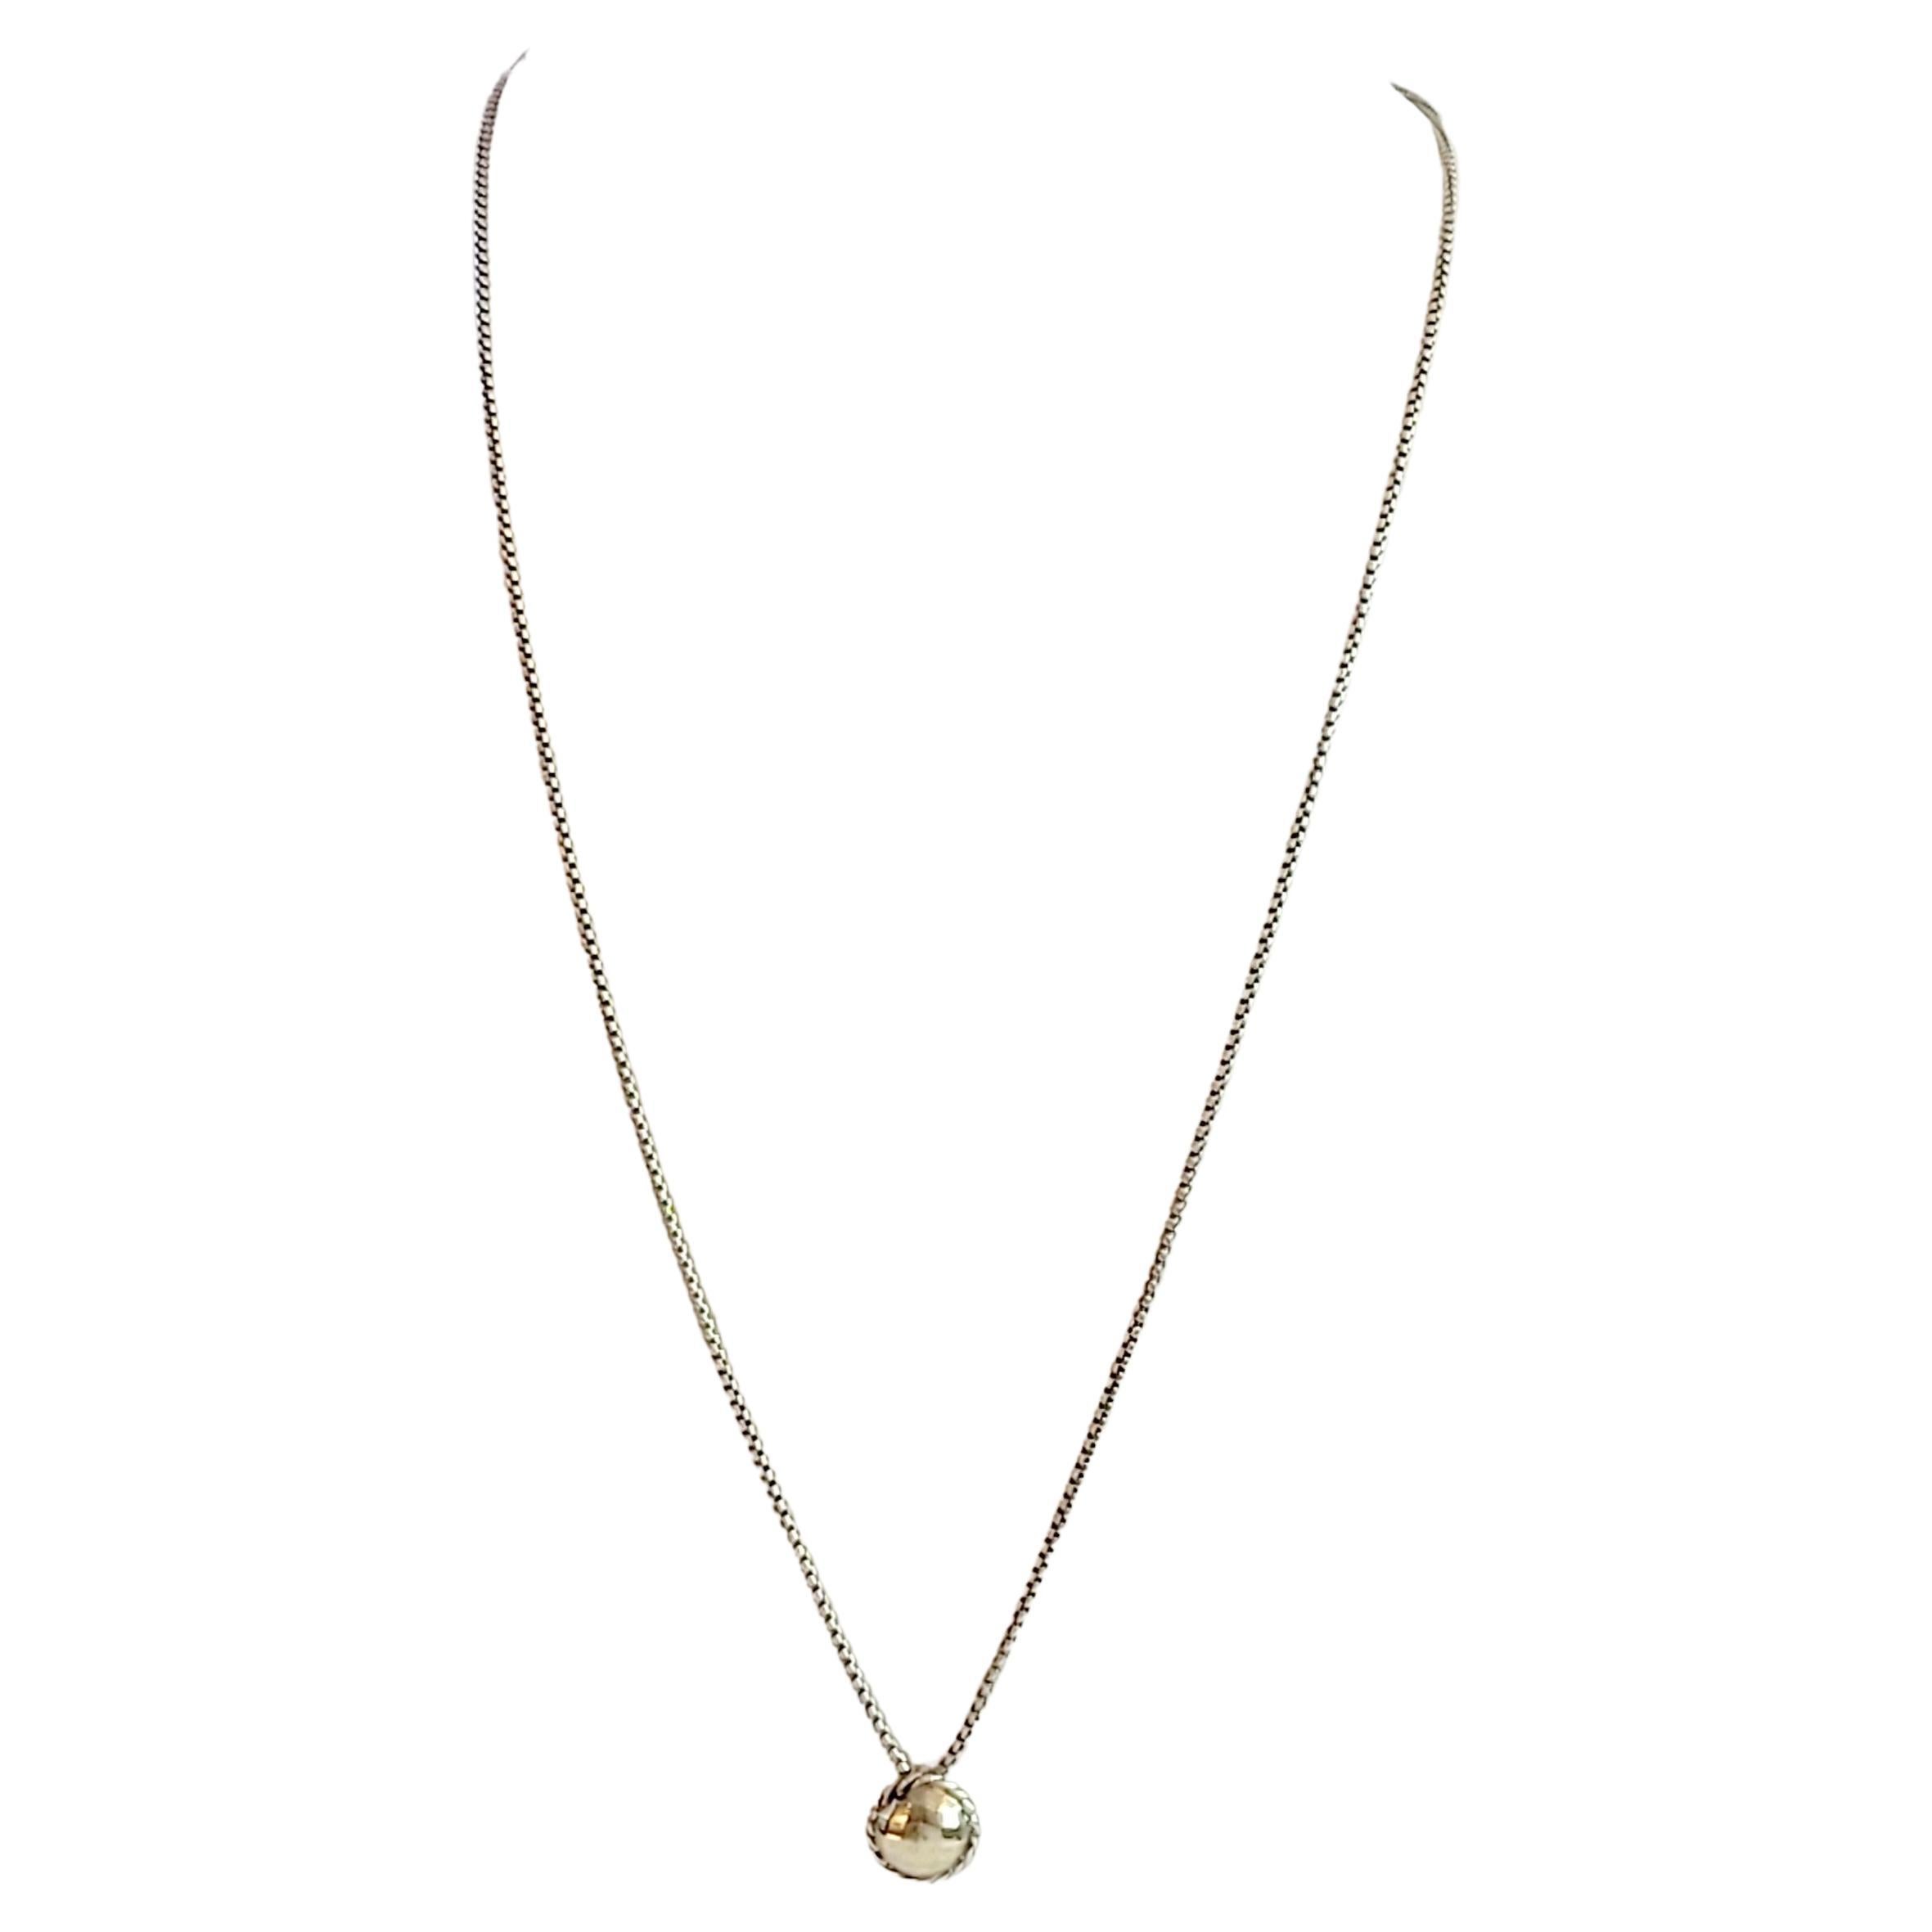 David Yurman 
Sterling Silver 925
18K bonded yellow gold dome
Pendant dimension 9 X 9.6mm
Chain length 18'' Long
Adjustable 17-18''
Weight 4.6gr Total 
Lobster clasp
Condition New, never worn
Comes with David Yurman pouch